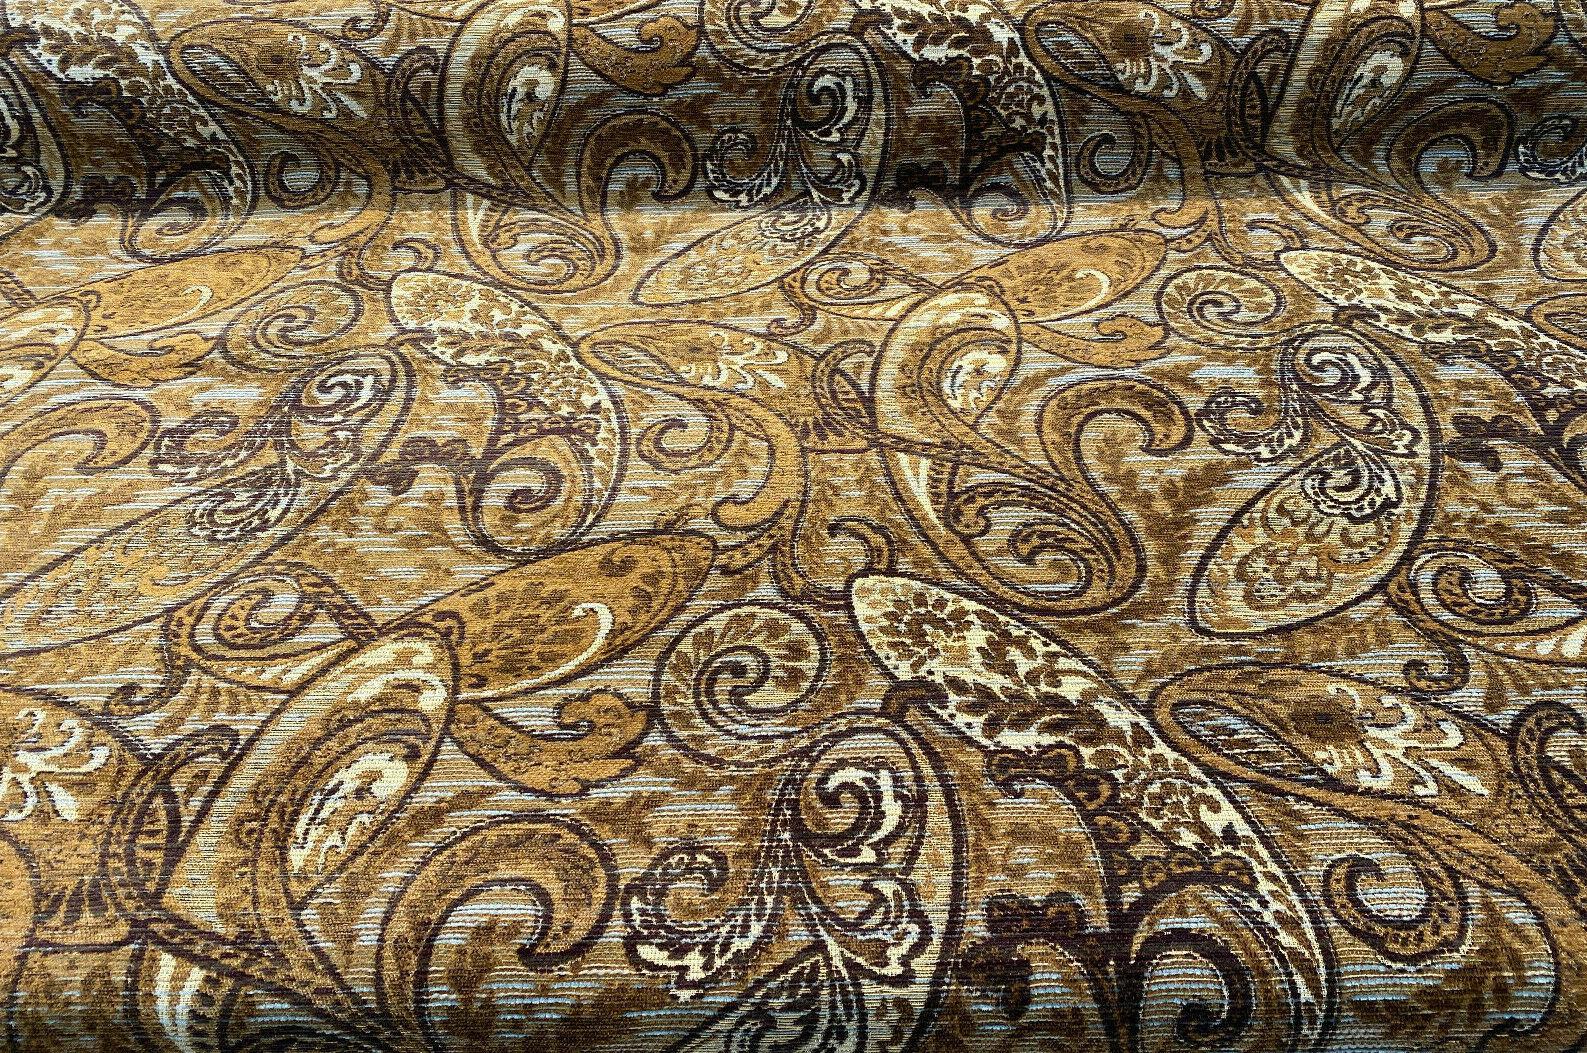 Chenille Fabric & Upholstery Fabric by the Yard